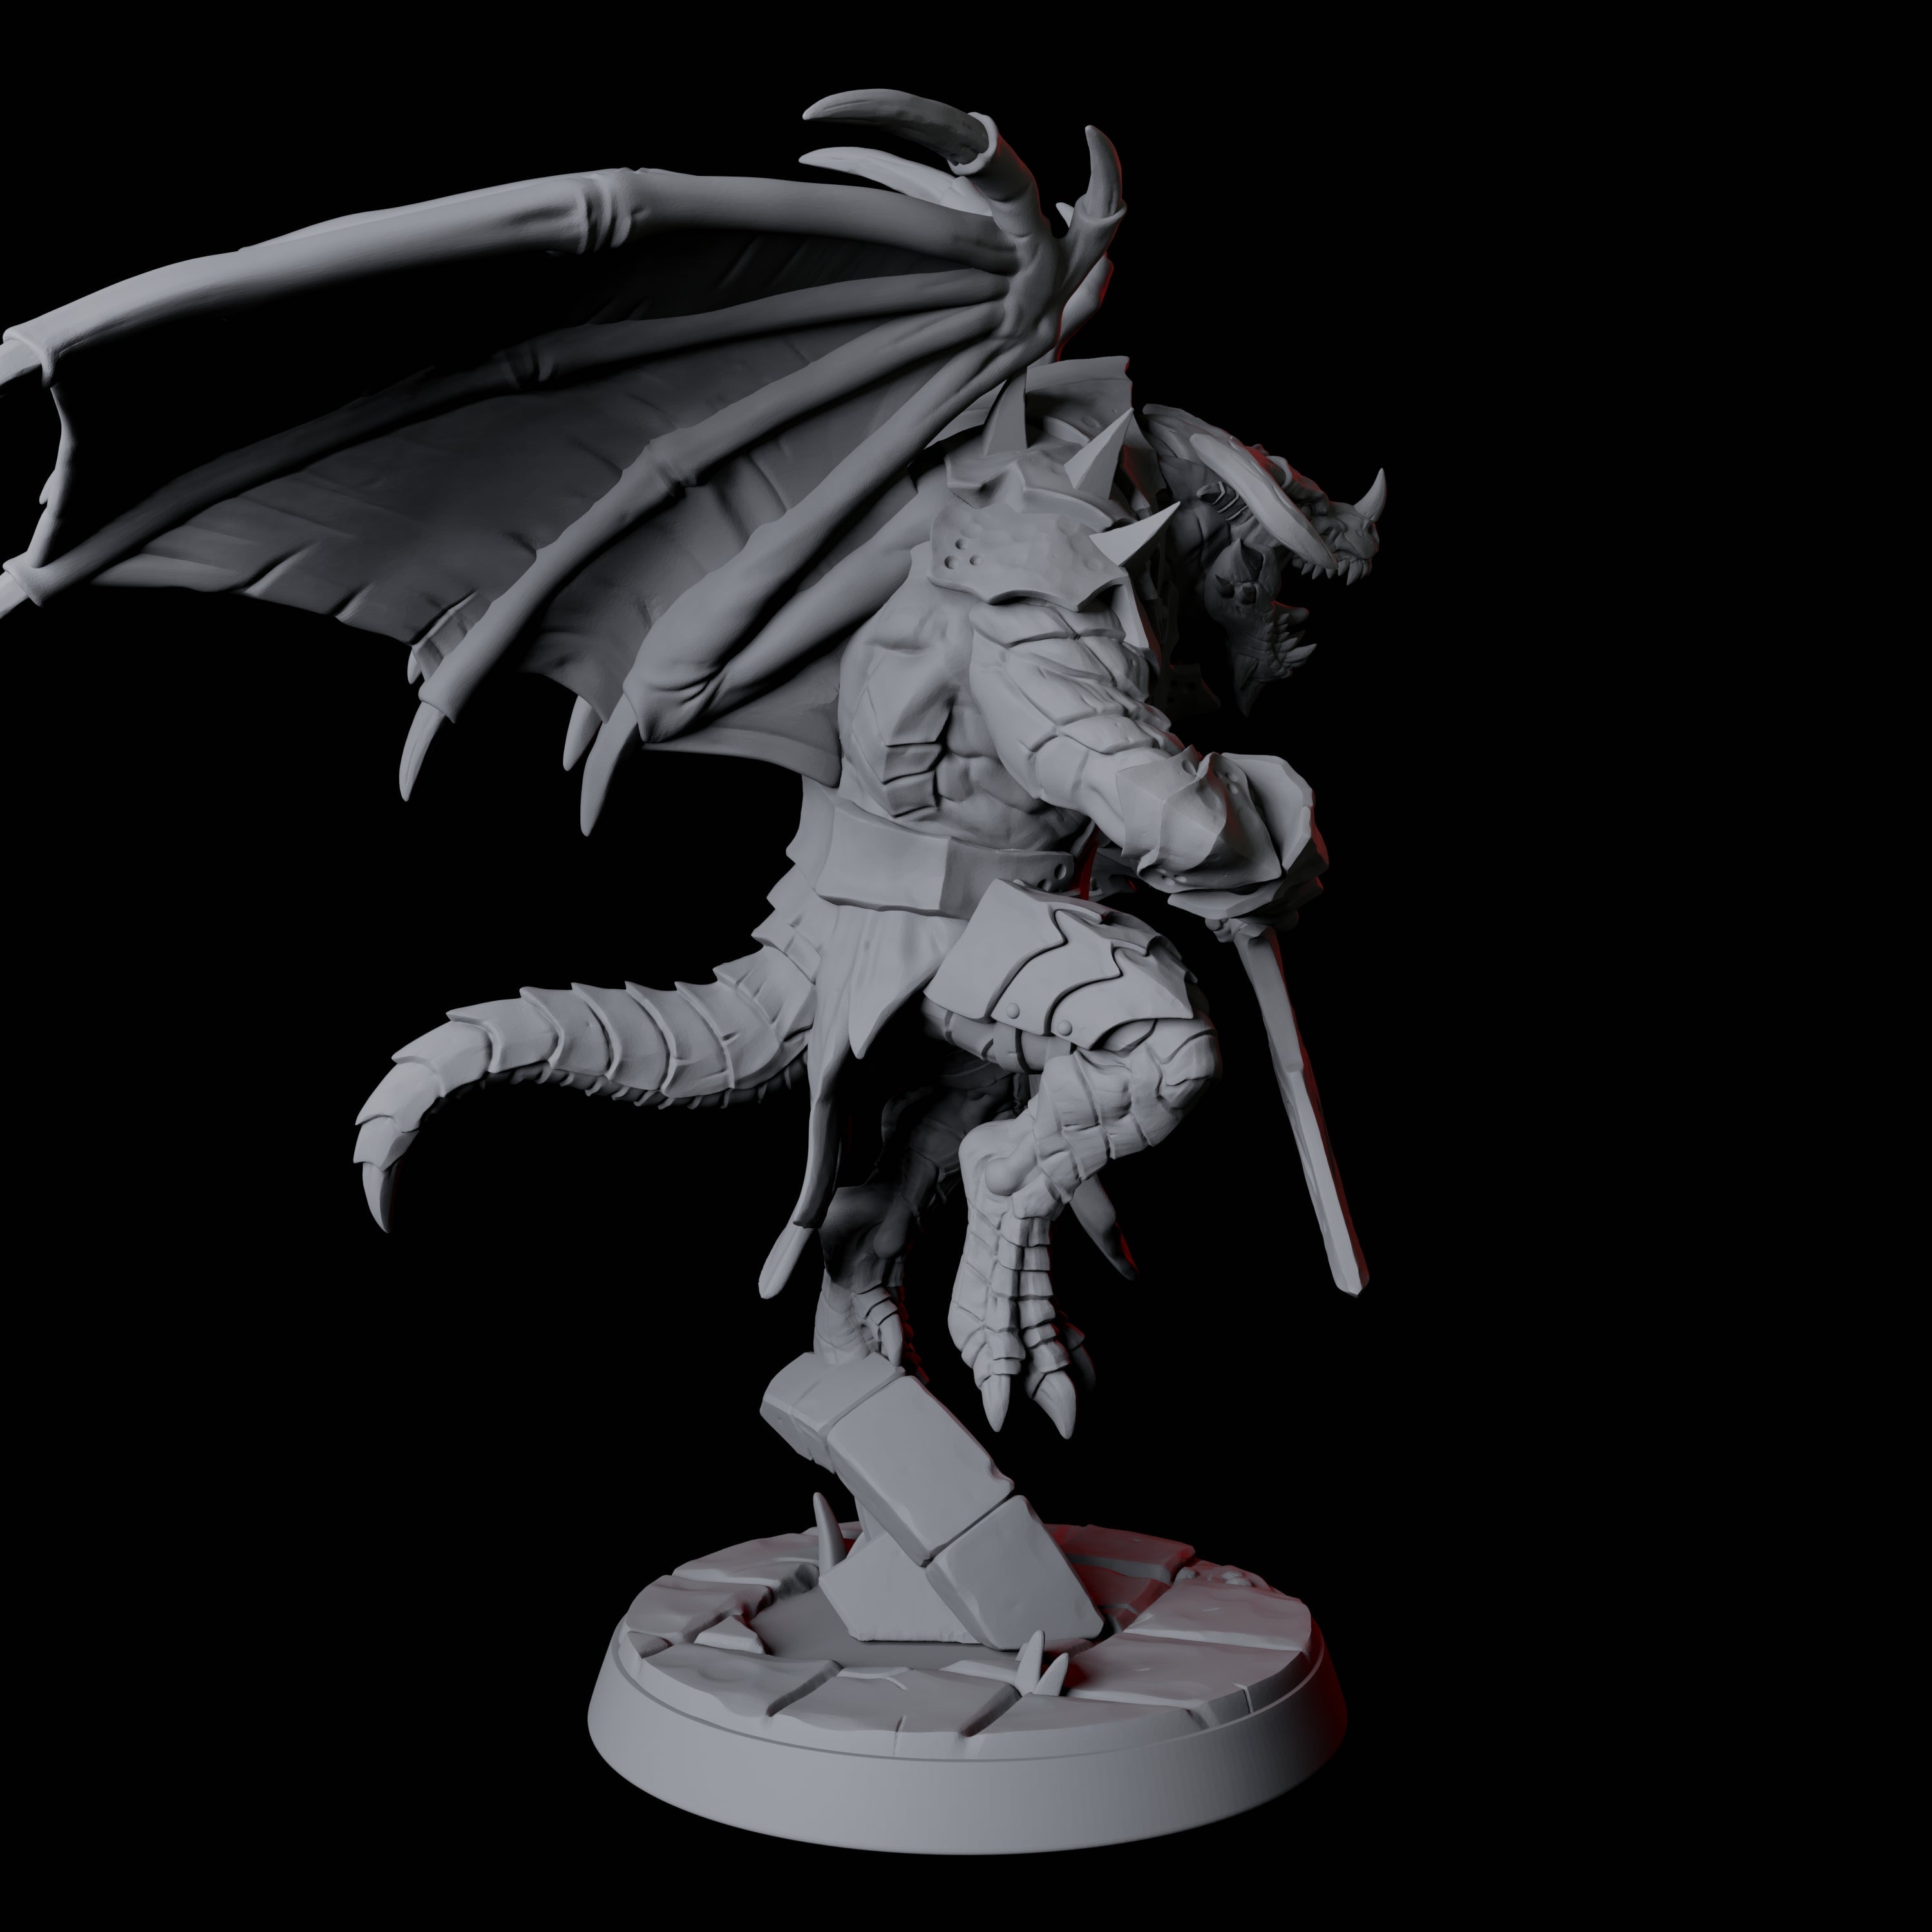 Dauntless Dragonborn Fighter E Miniature for Dungeons and Dragons, Pathfinder or other TTRPGs